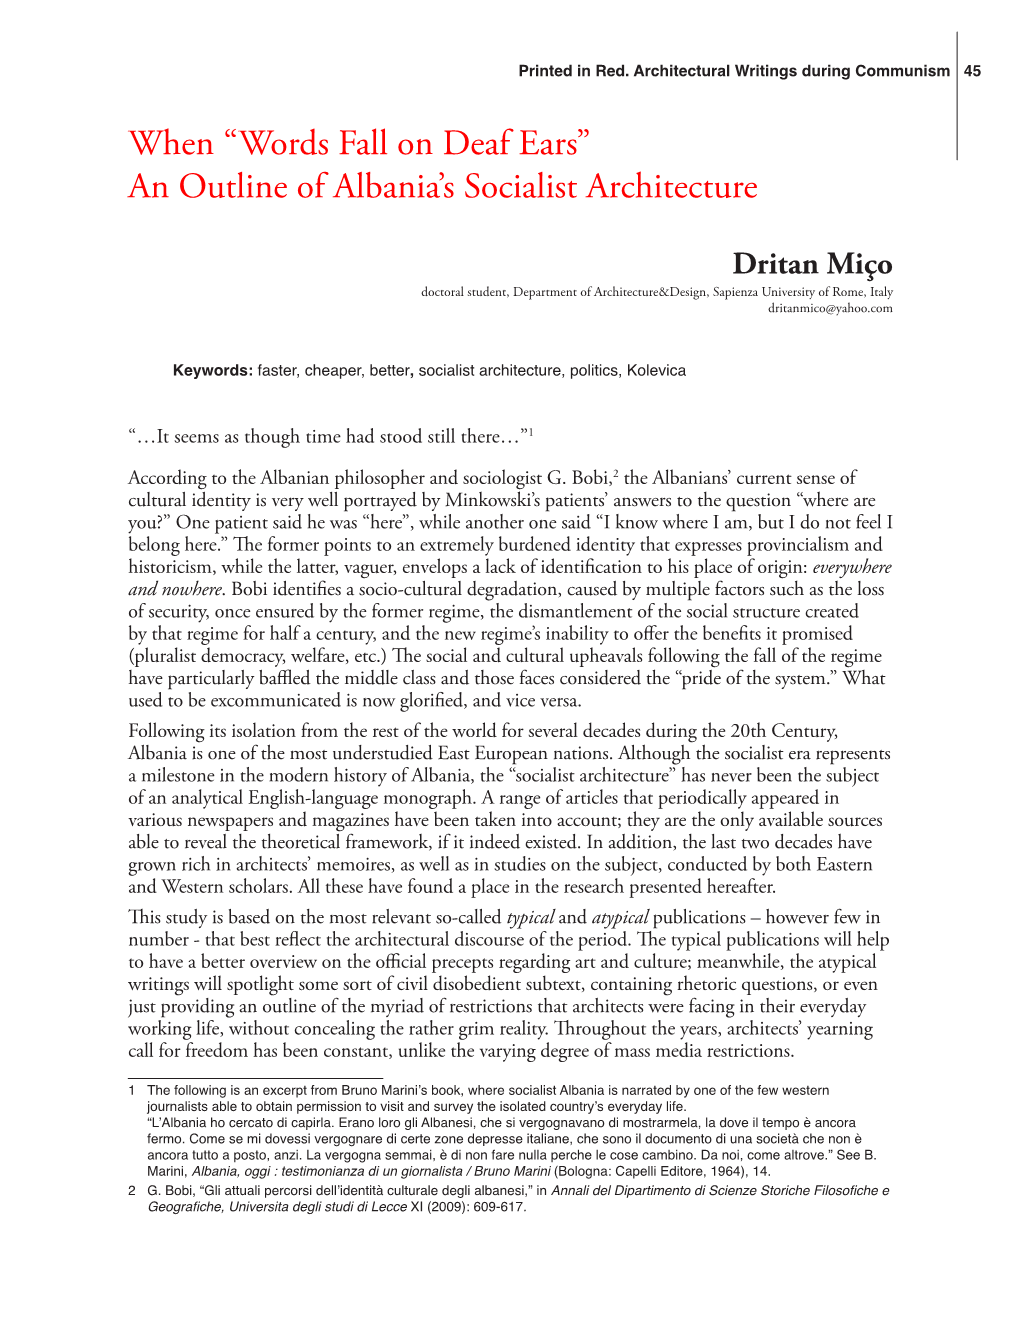 An Outline of Albania's Socialist Architecture